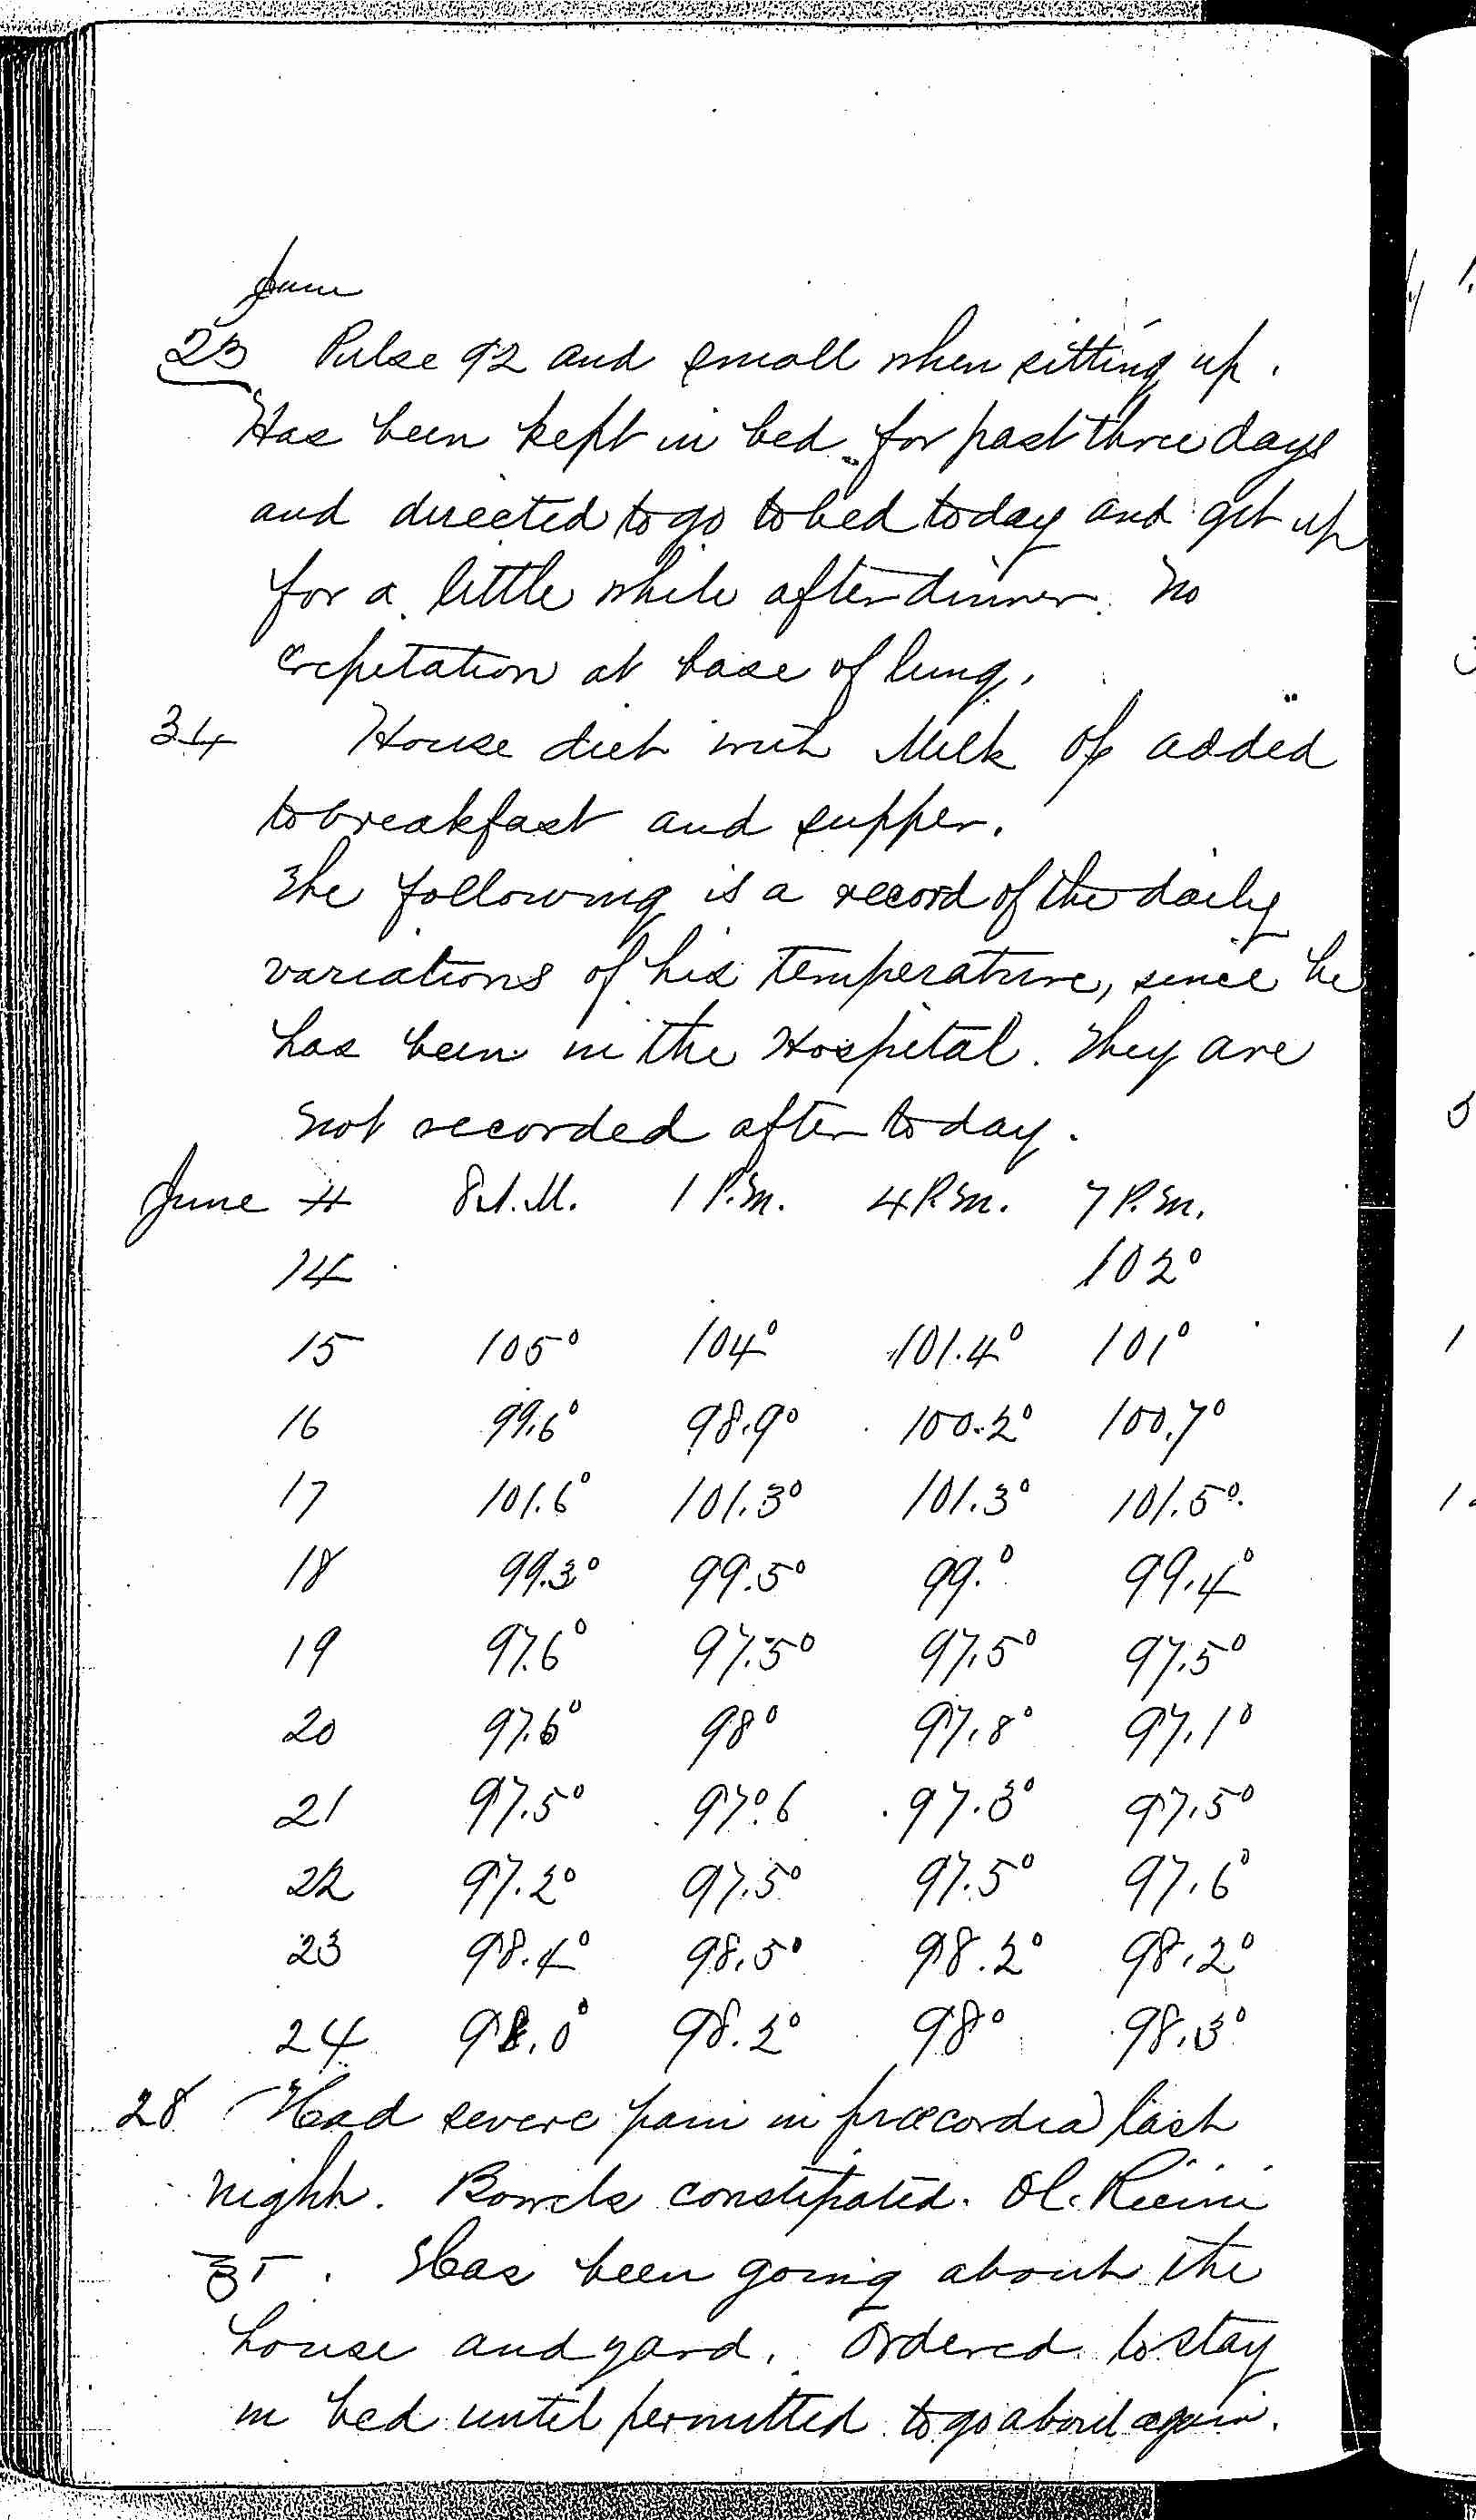 Entry for James Lachall (page 4 of 5) in the log Hospital Tickets and Case Papers - Naval Hospital - Washington, D.C. - 1868-69